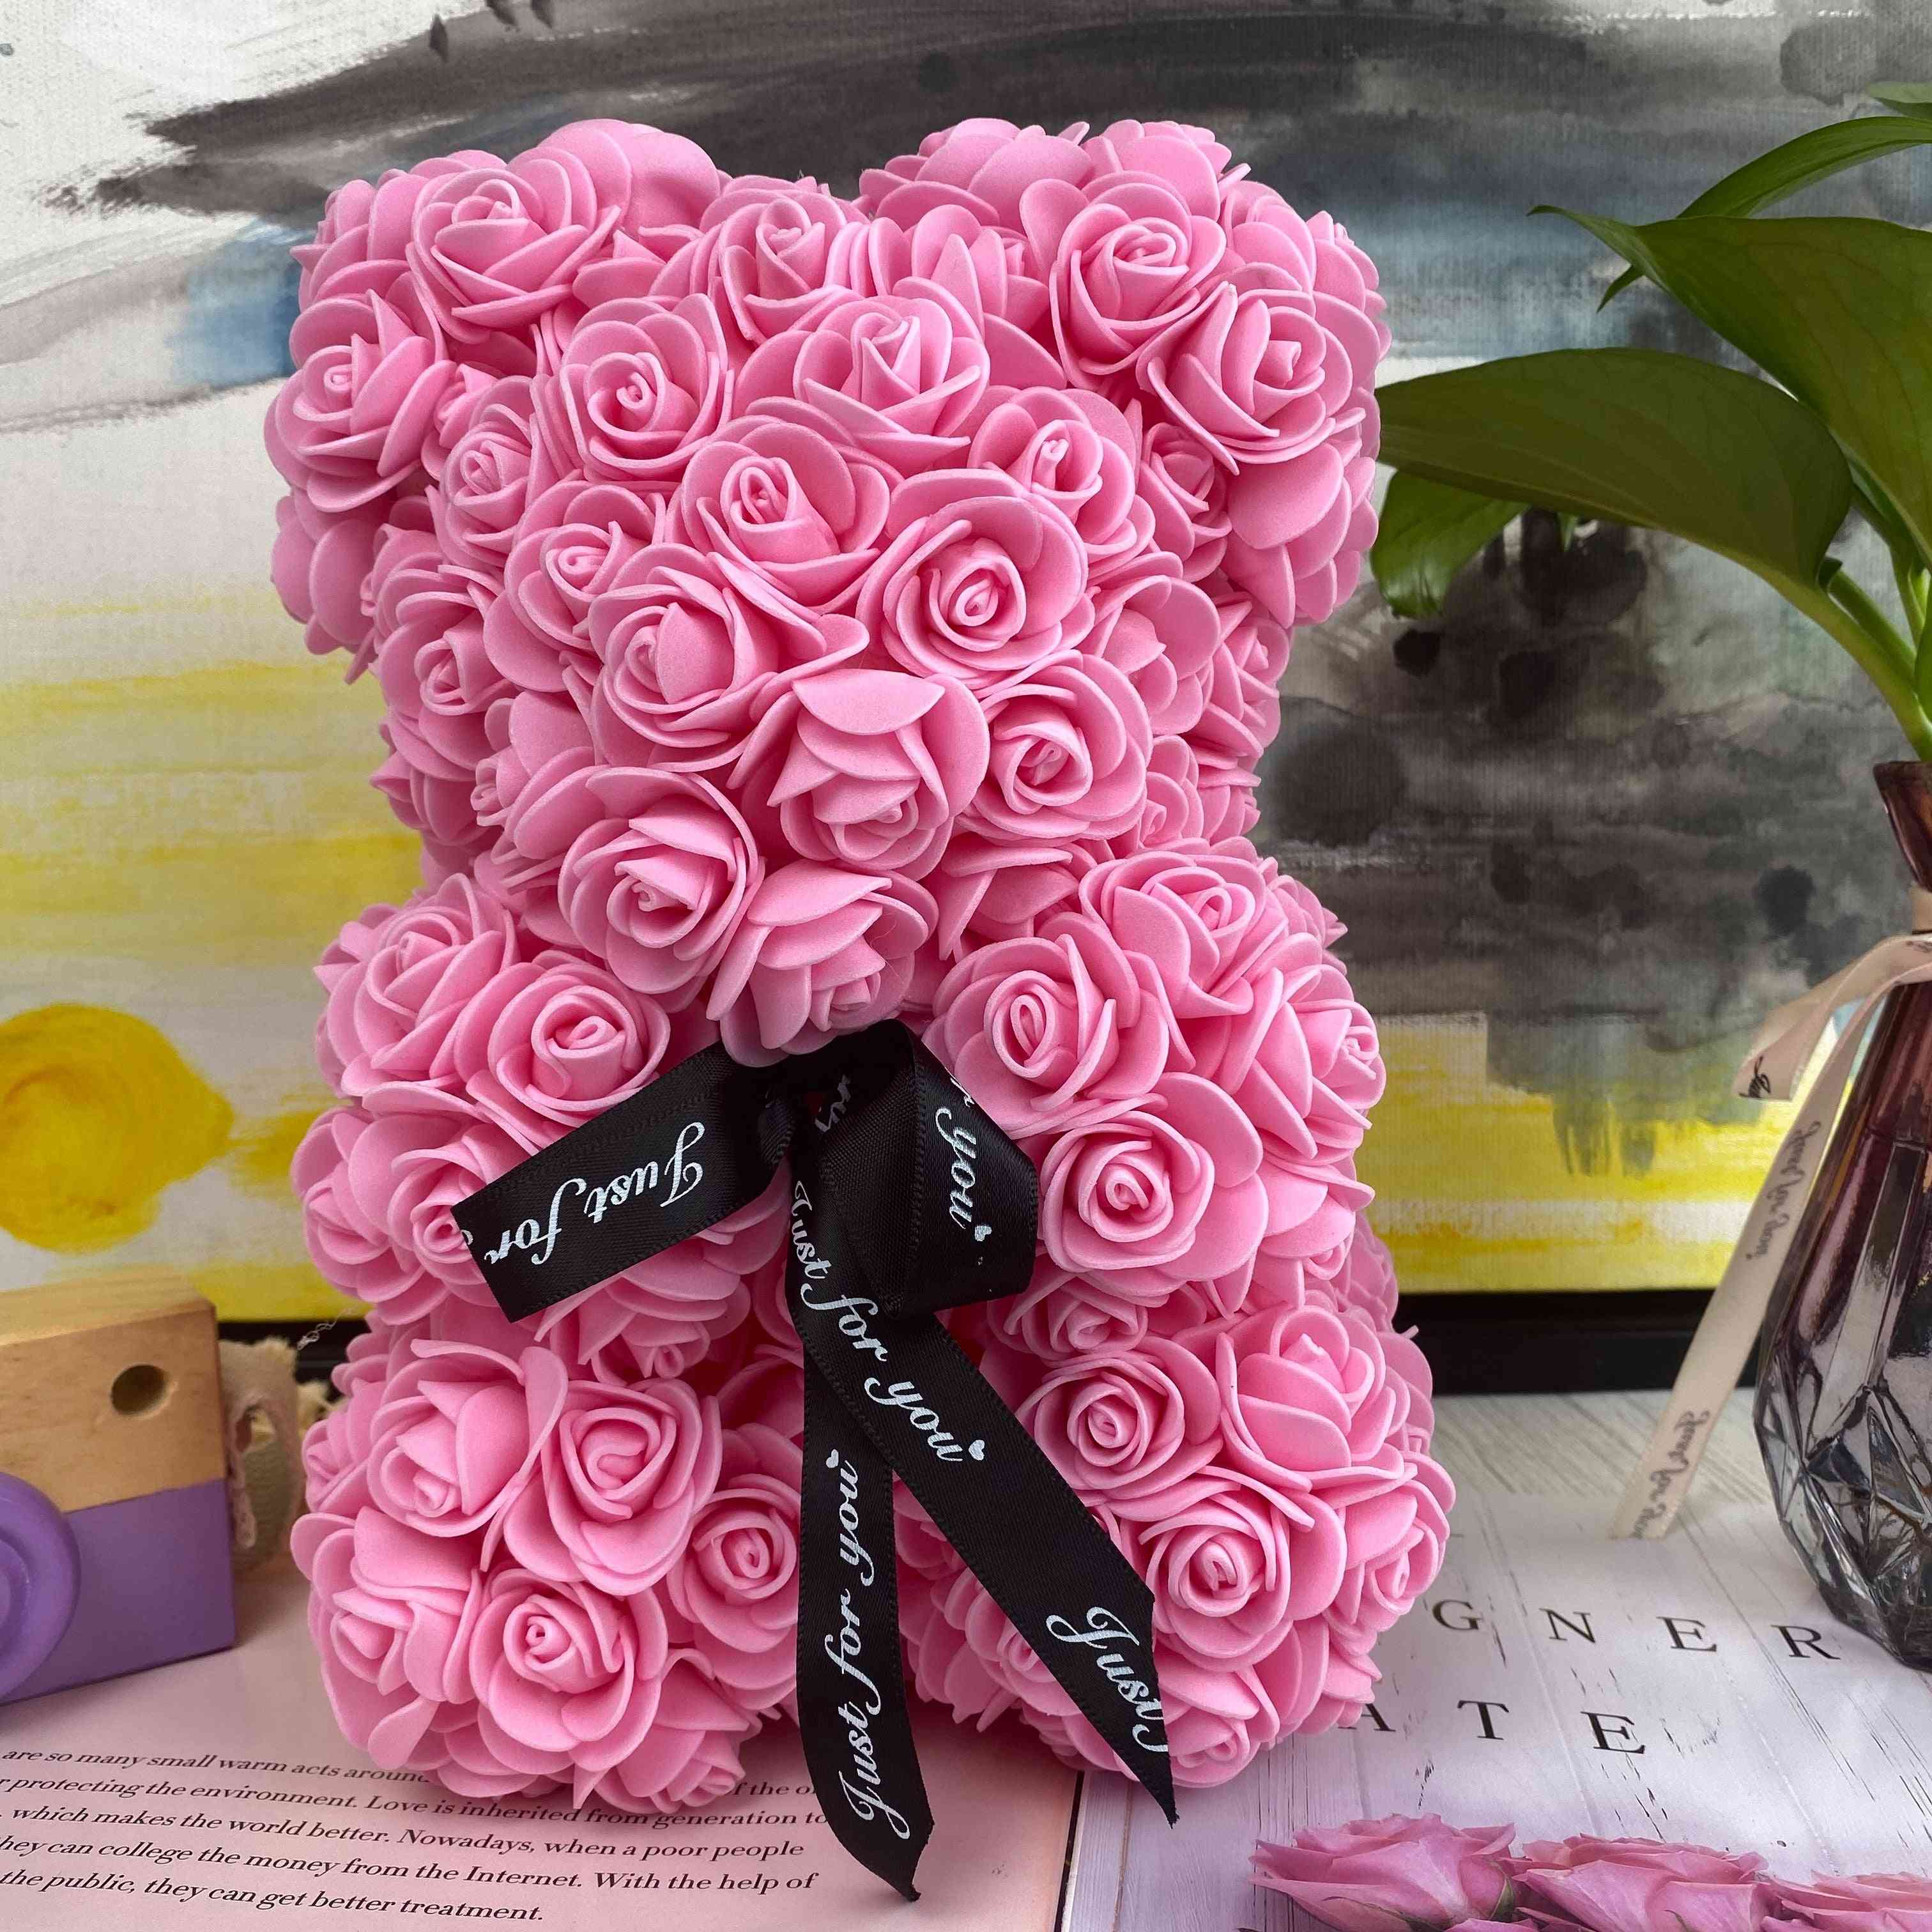 Artificial Rose Flower Teddy Bear For Christmas Decoration, Valentines